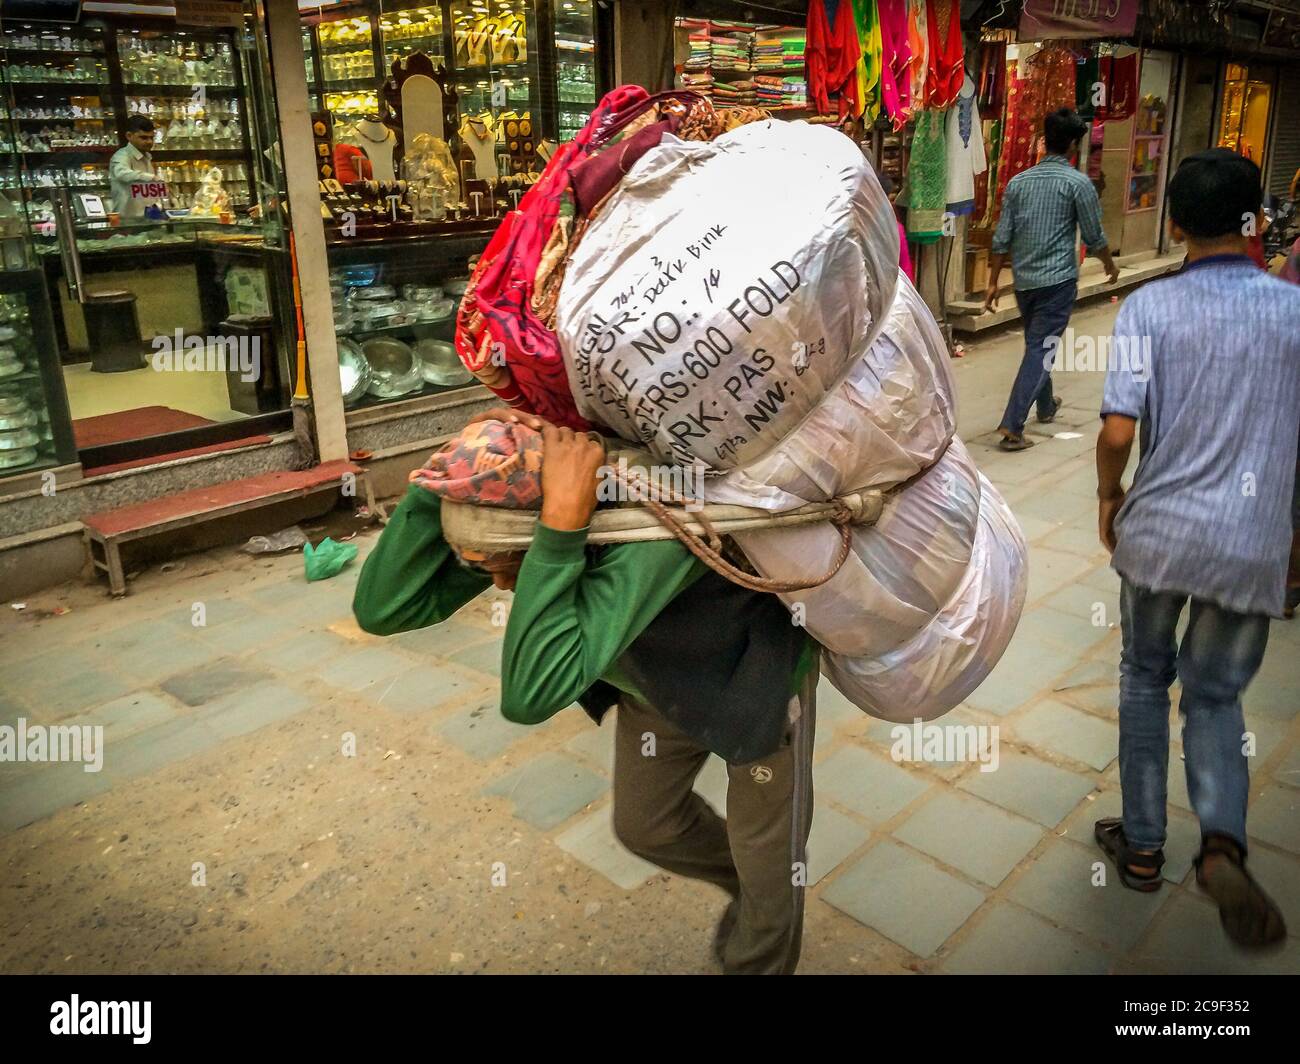 Unidentified Sherpa carrying so many things on his back in Kathmandu, Nepal. Stock Photo